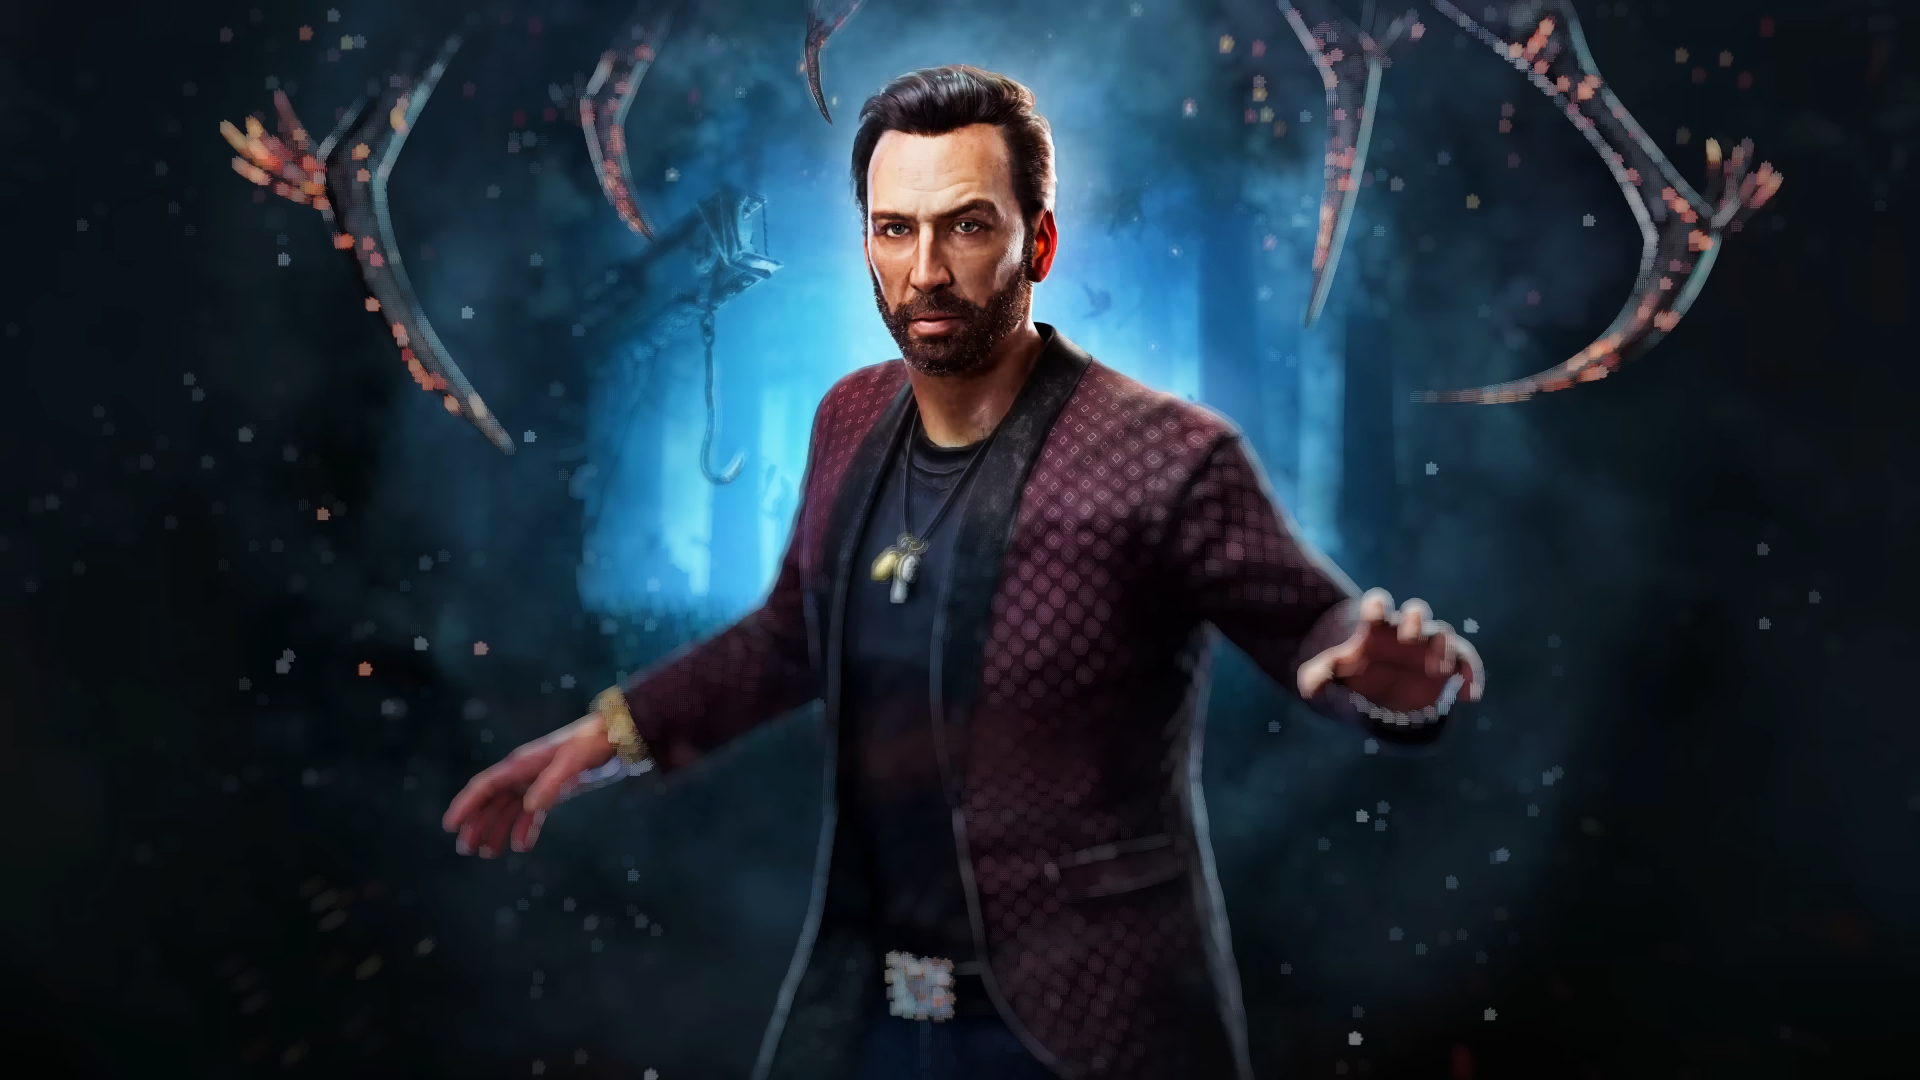 Dead by Daylight adds best survivor yet, and it's Nicolas Cage